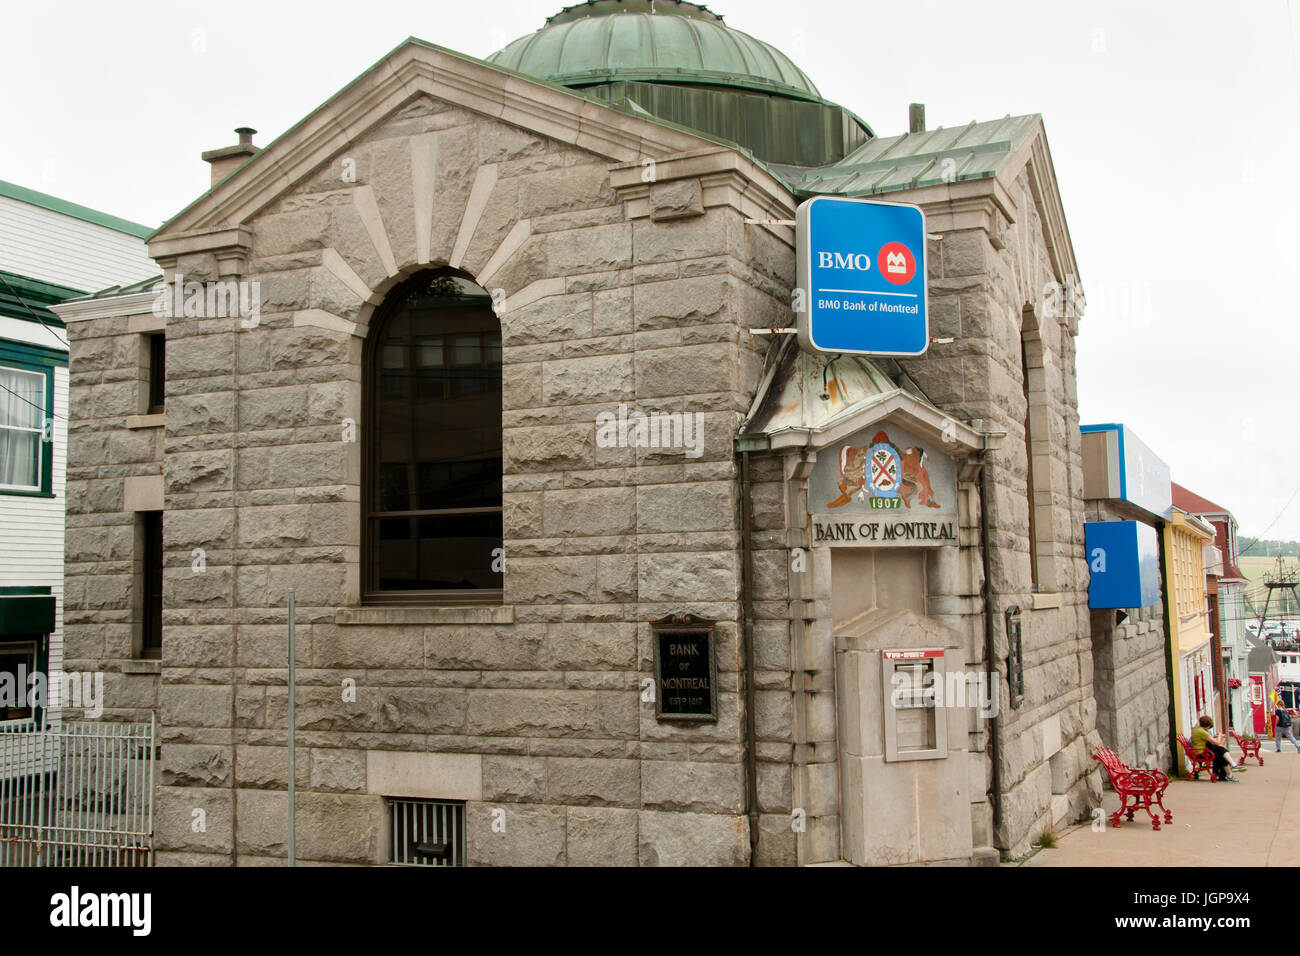 LUNENBURG, CANADA - August 14, 2016: Old building of Bank of Montreal (BMO) Stock Photo